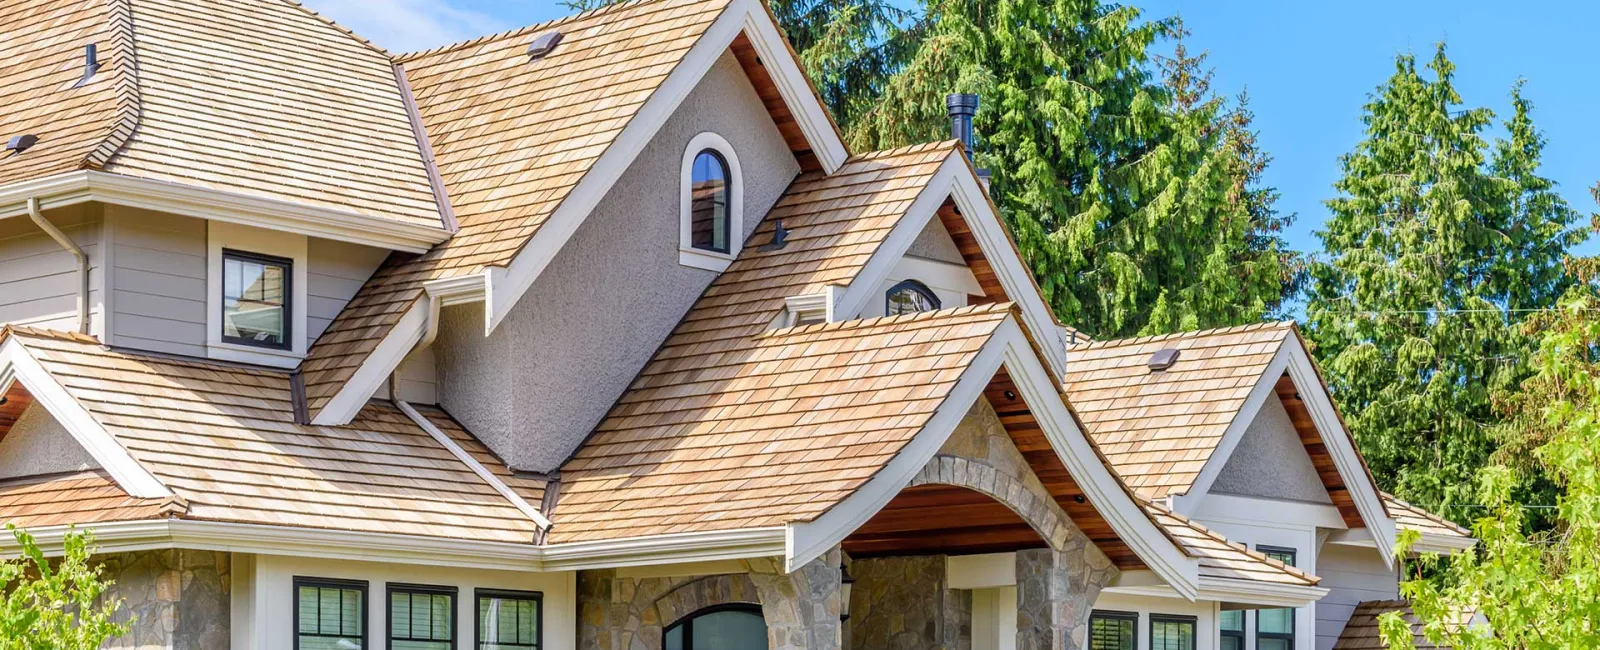 Roofing Materials and How They Affect the Temperature of Your Home